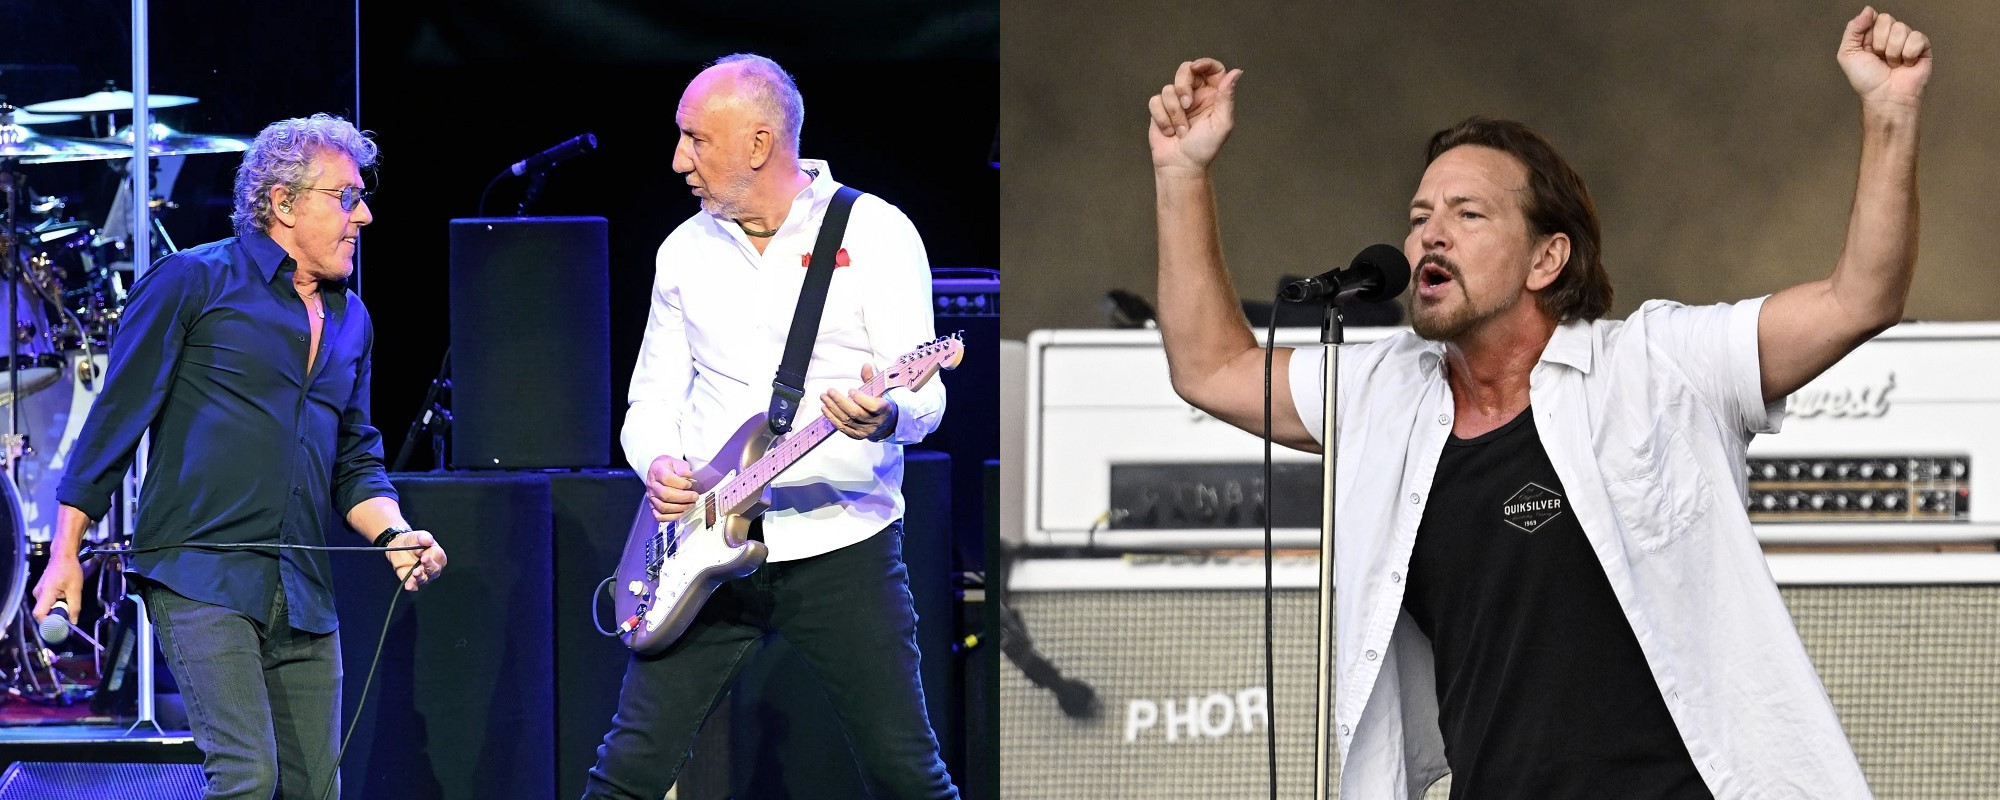 Watch Pearl Jam’s Eddie Vedder Rock Out with The Who at the U.K. Legends’ Concert in London